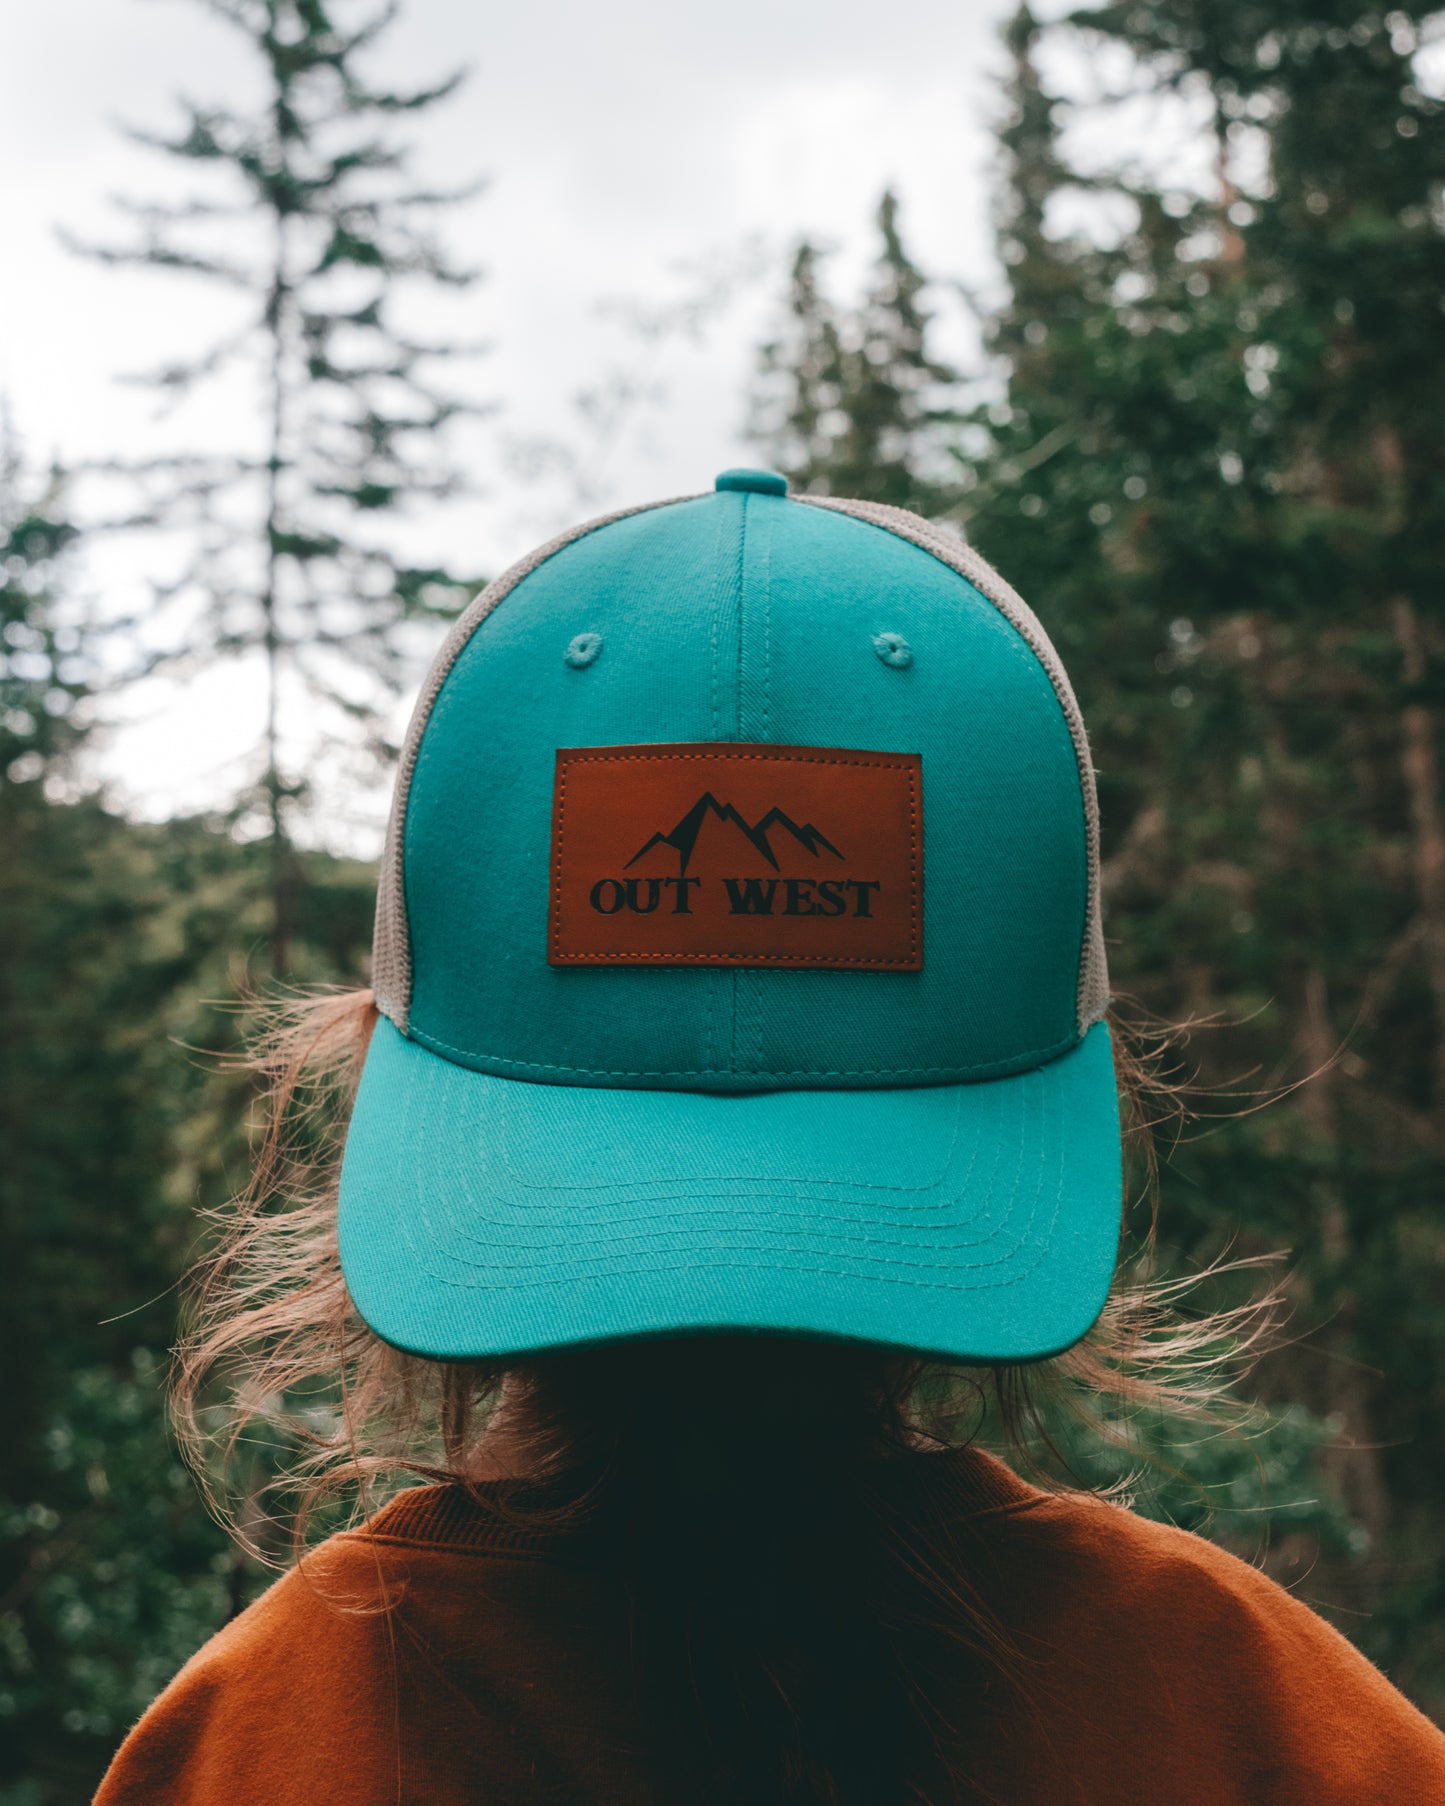 Out West ball cap in Aqua-  Our in-demand trucker caps are finally here + proudly designed by Out West! Not only fun & functional but truly a stylish staple piece for any rancher!  A gorgeous aqua color with a light cream mesh back & adjustable strap.